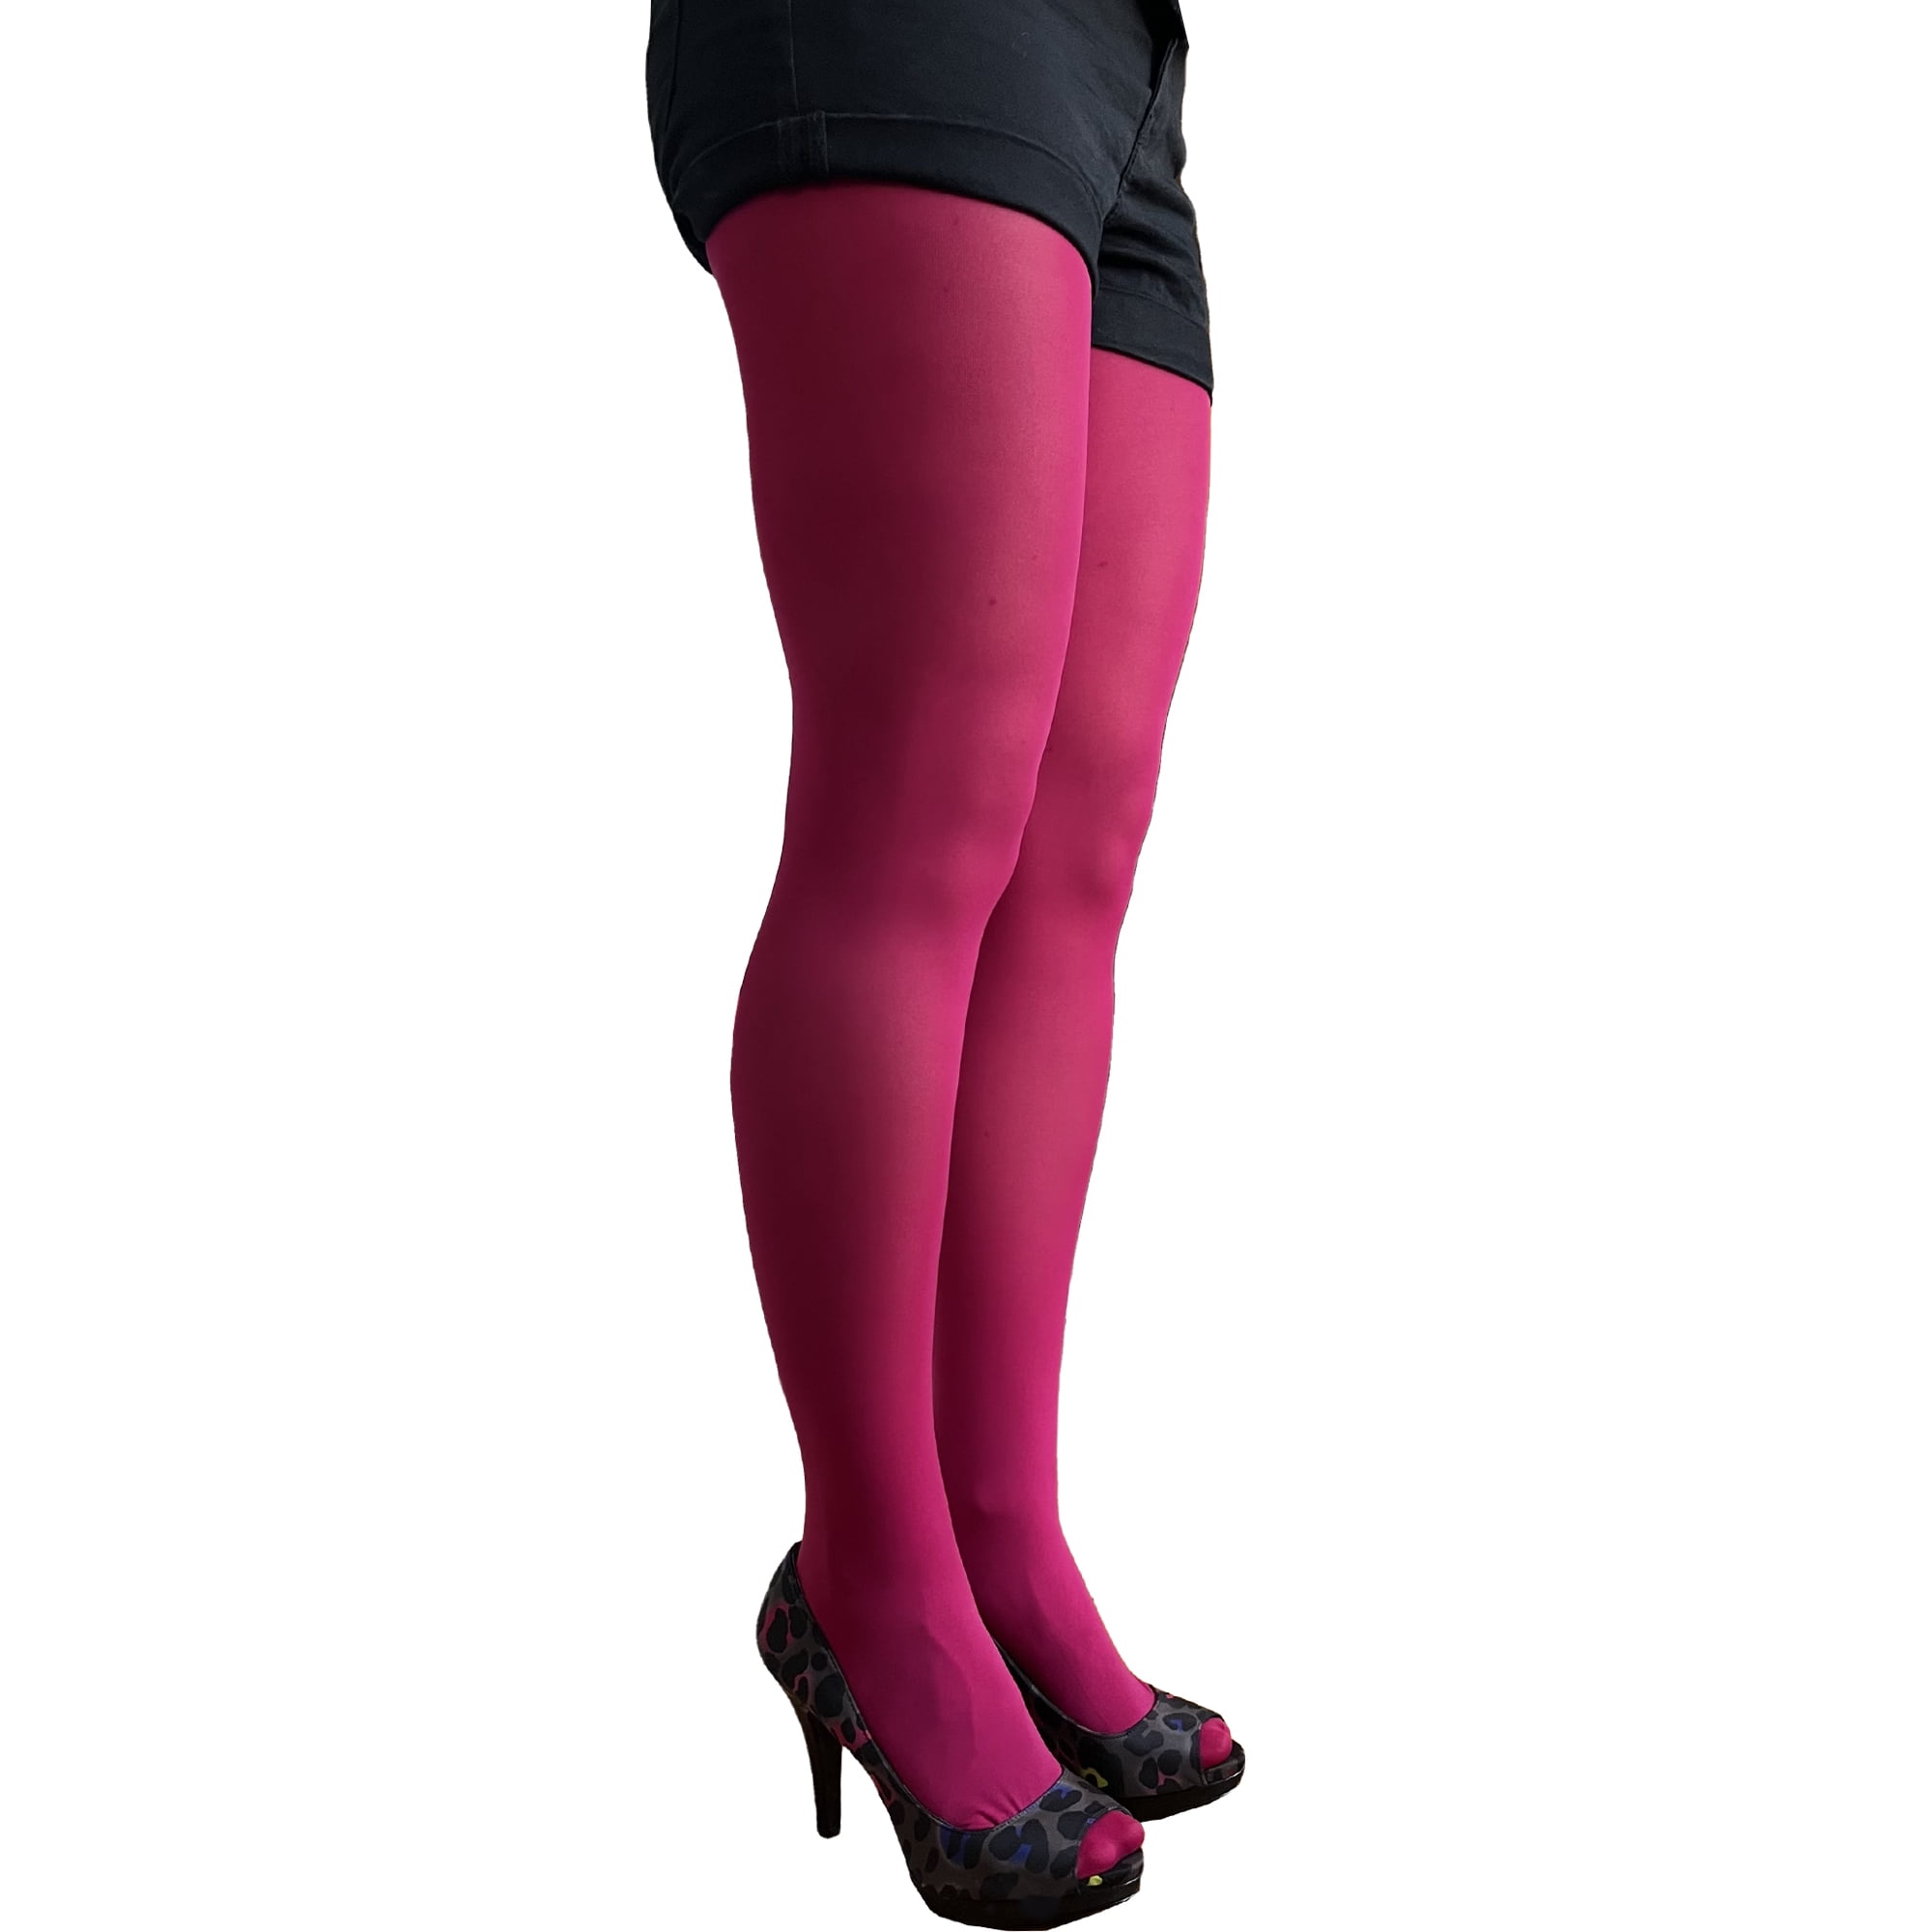 Cherry Pink Opaque Full Footed Tights, Pantyhose for Women